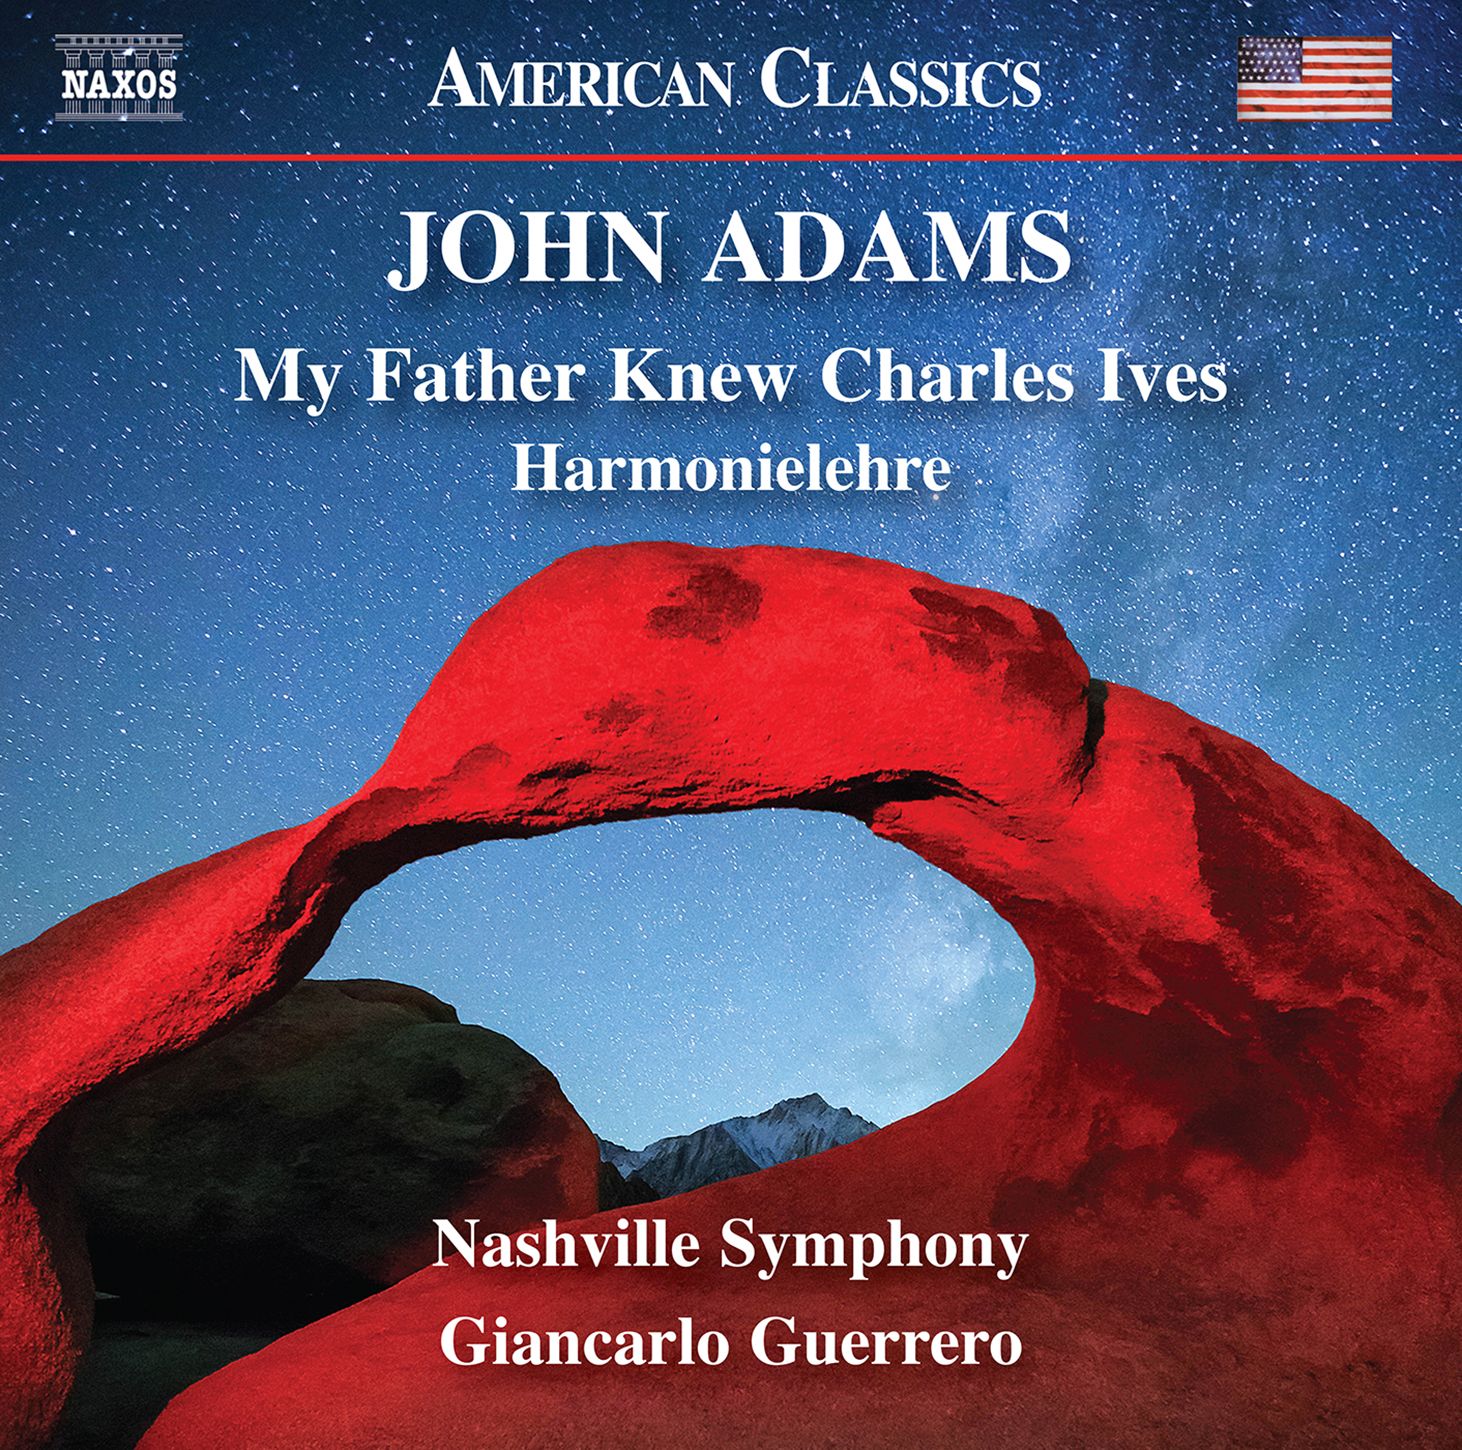 My Father Knew Charles Ives: The Music of John Adams